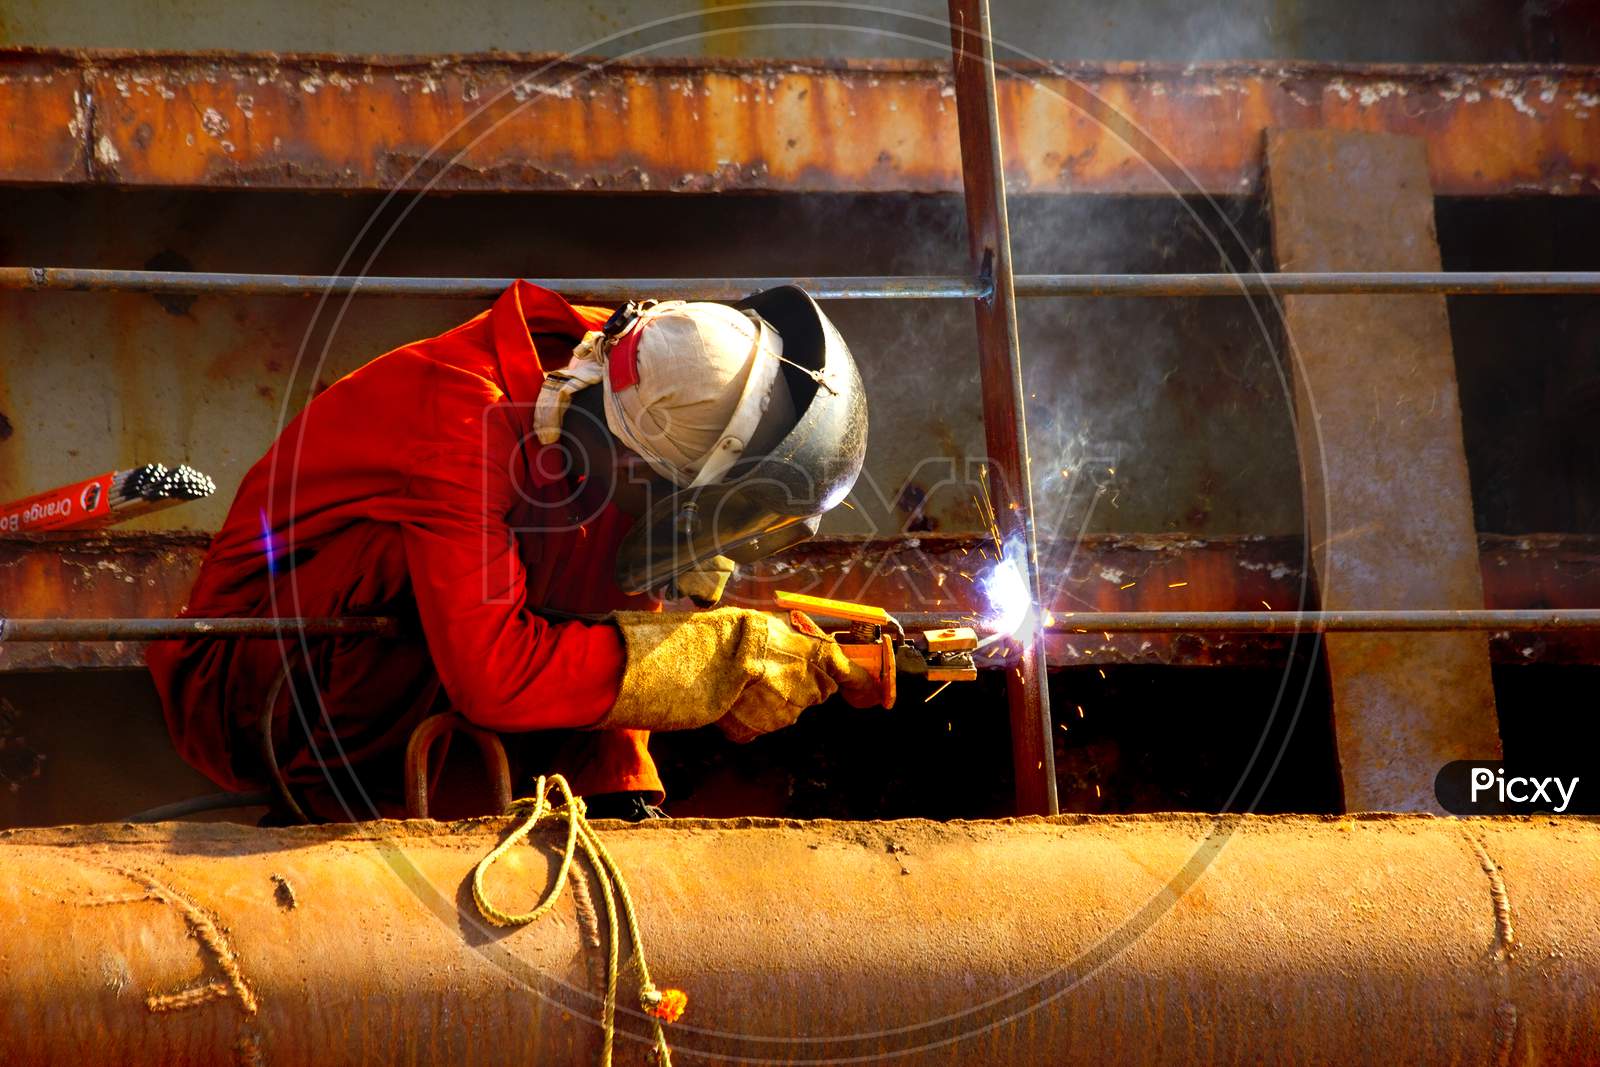 A Worker doing welding with a Helmet on